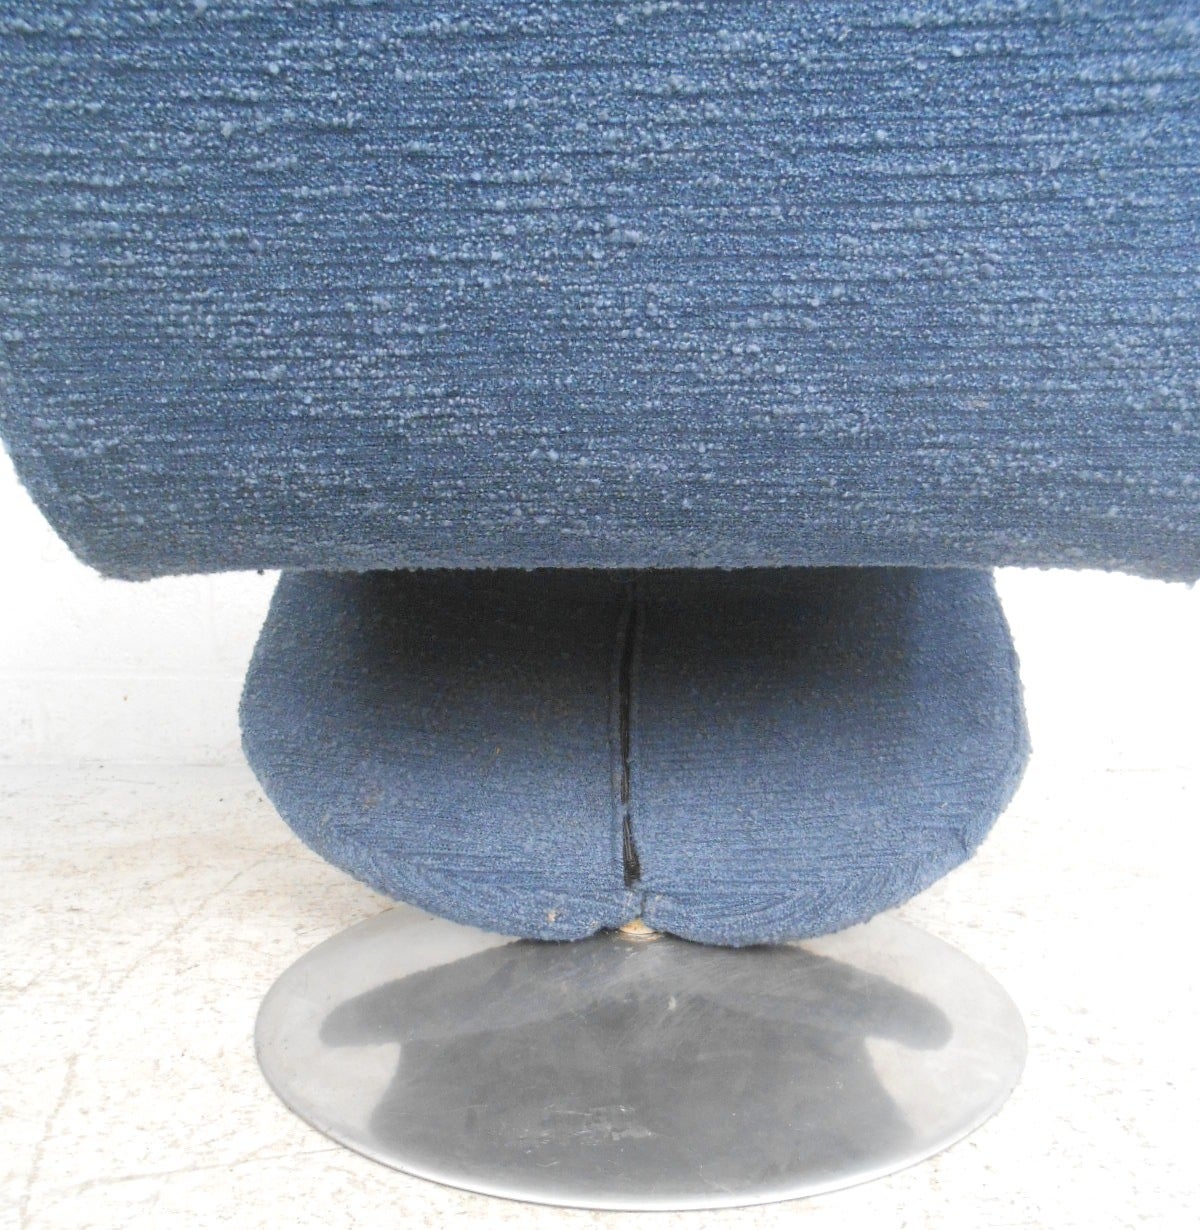 Late 20th Century Mid-Century Modern 1-2-3 System Slipper Chair attributed to Verner Panton